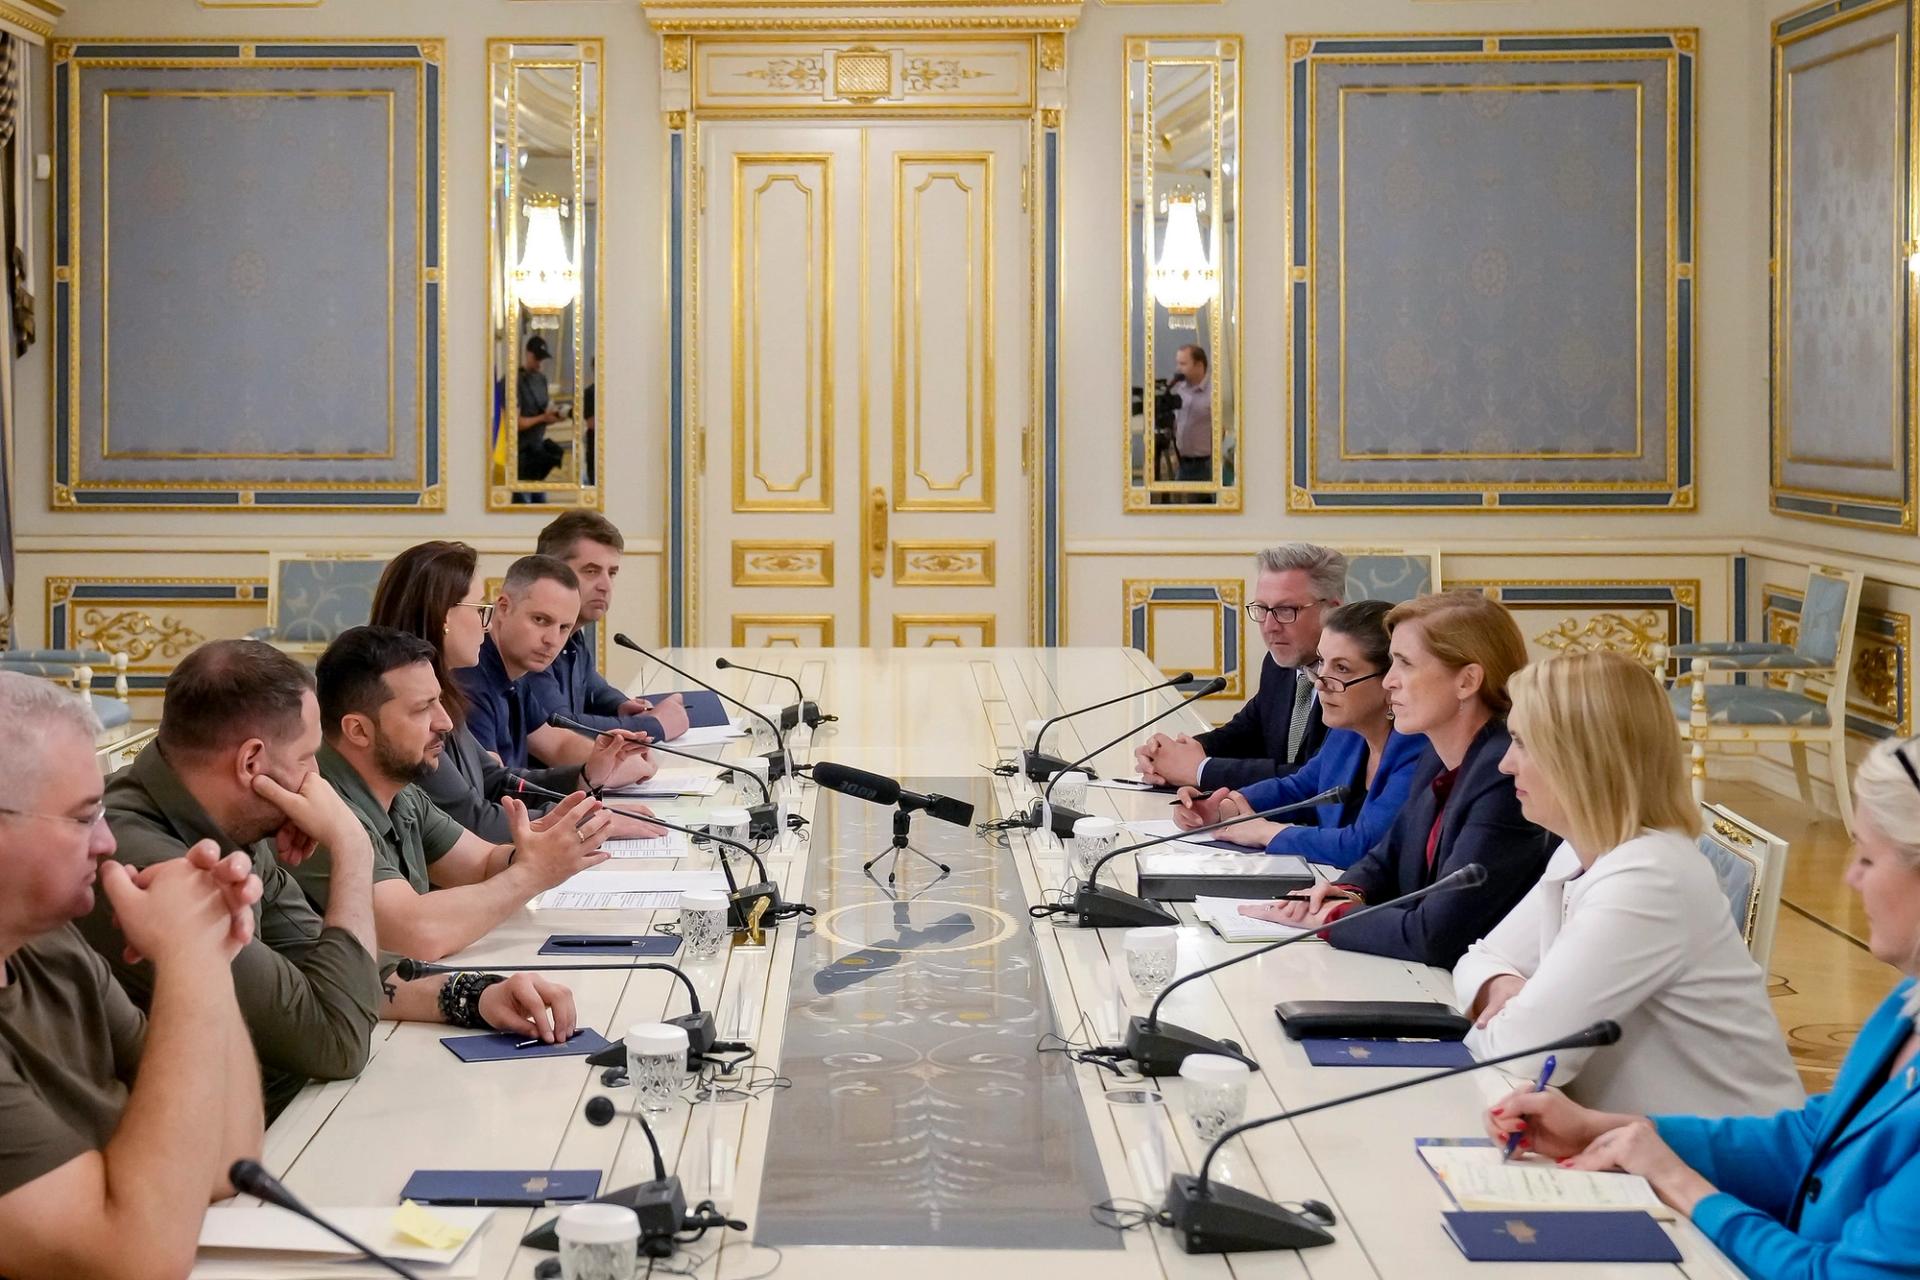 USAID Administrator Samantha Power and President of Ukraine Volodymyr Zelenskyy in a meeting.